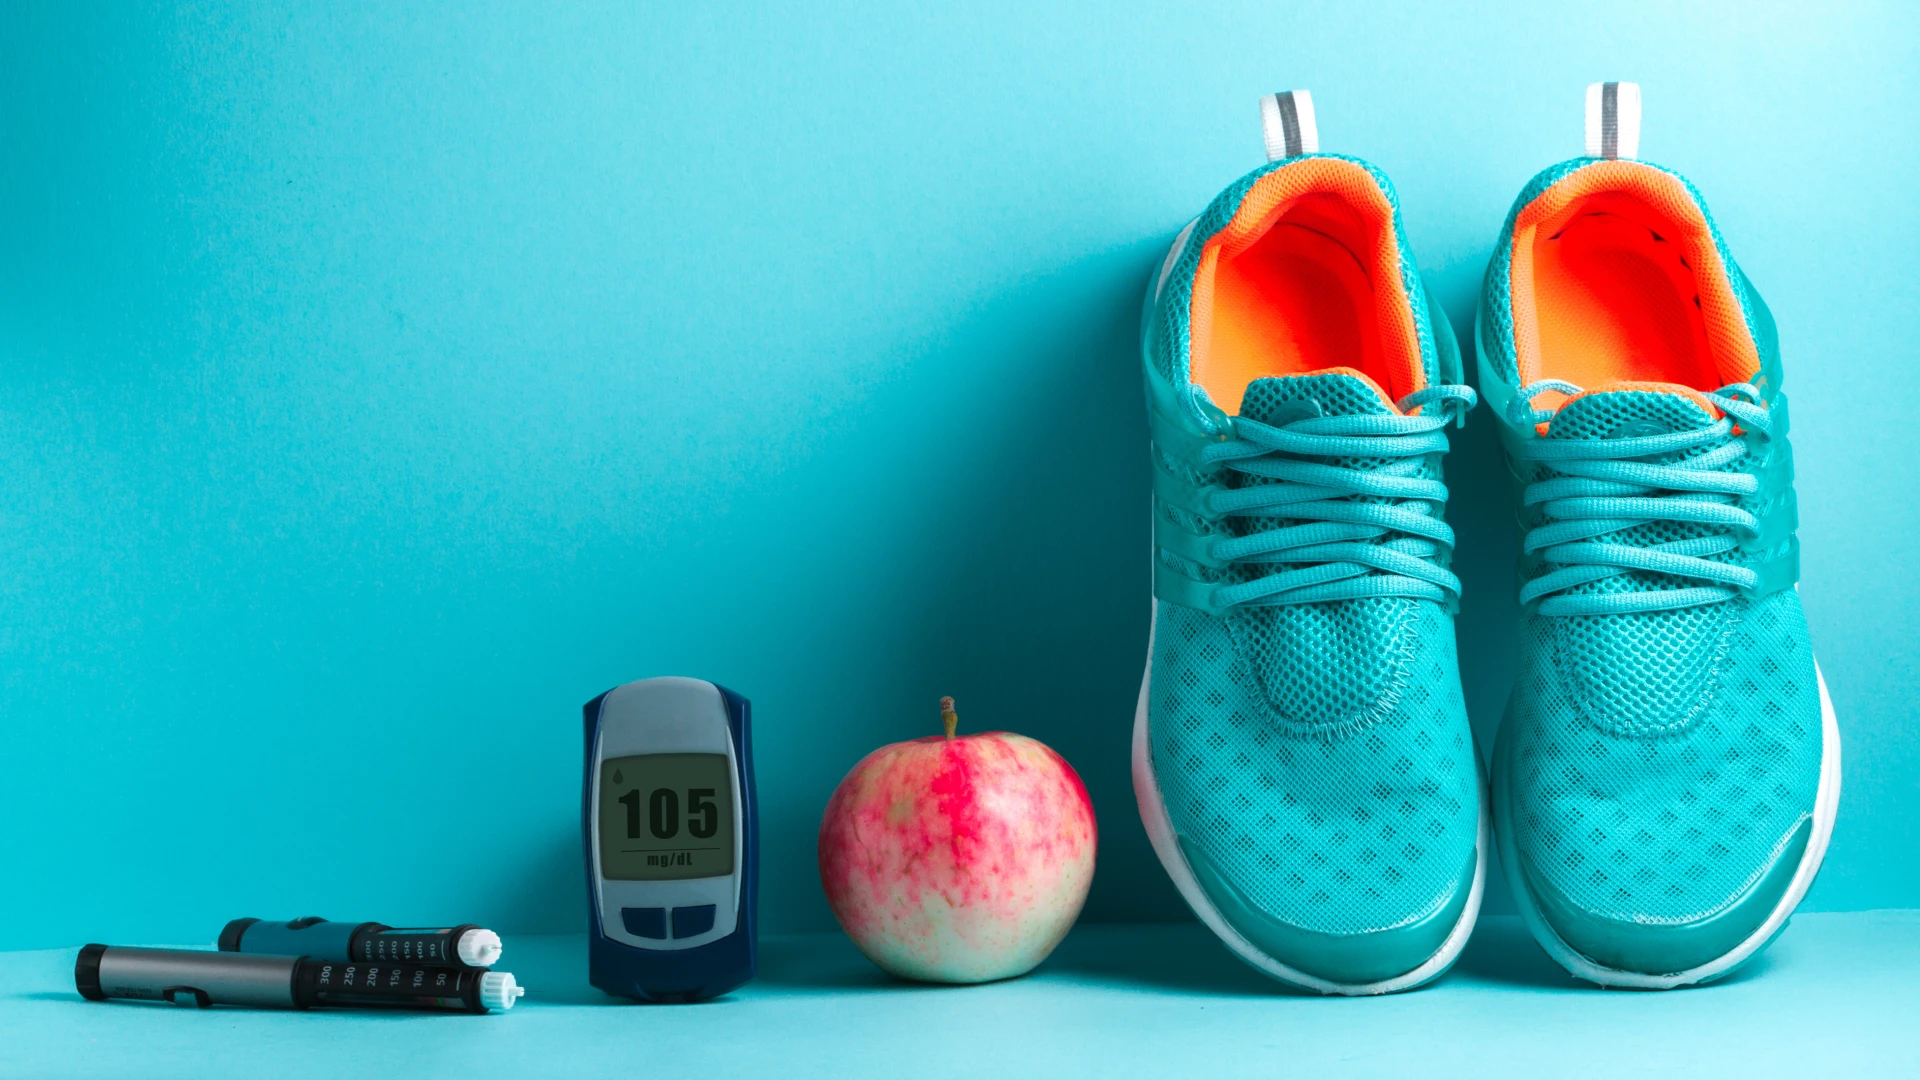 BLOG POST - Living Well with Type 2 Diabetes: Practical Tips for Everyday Management